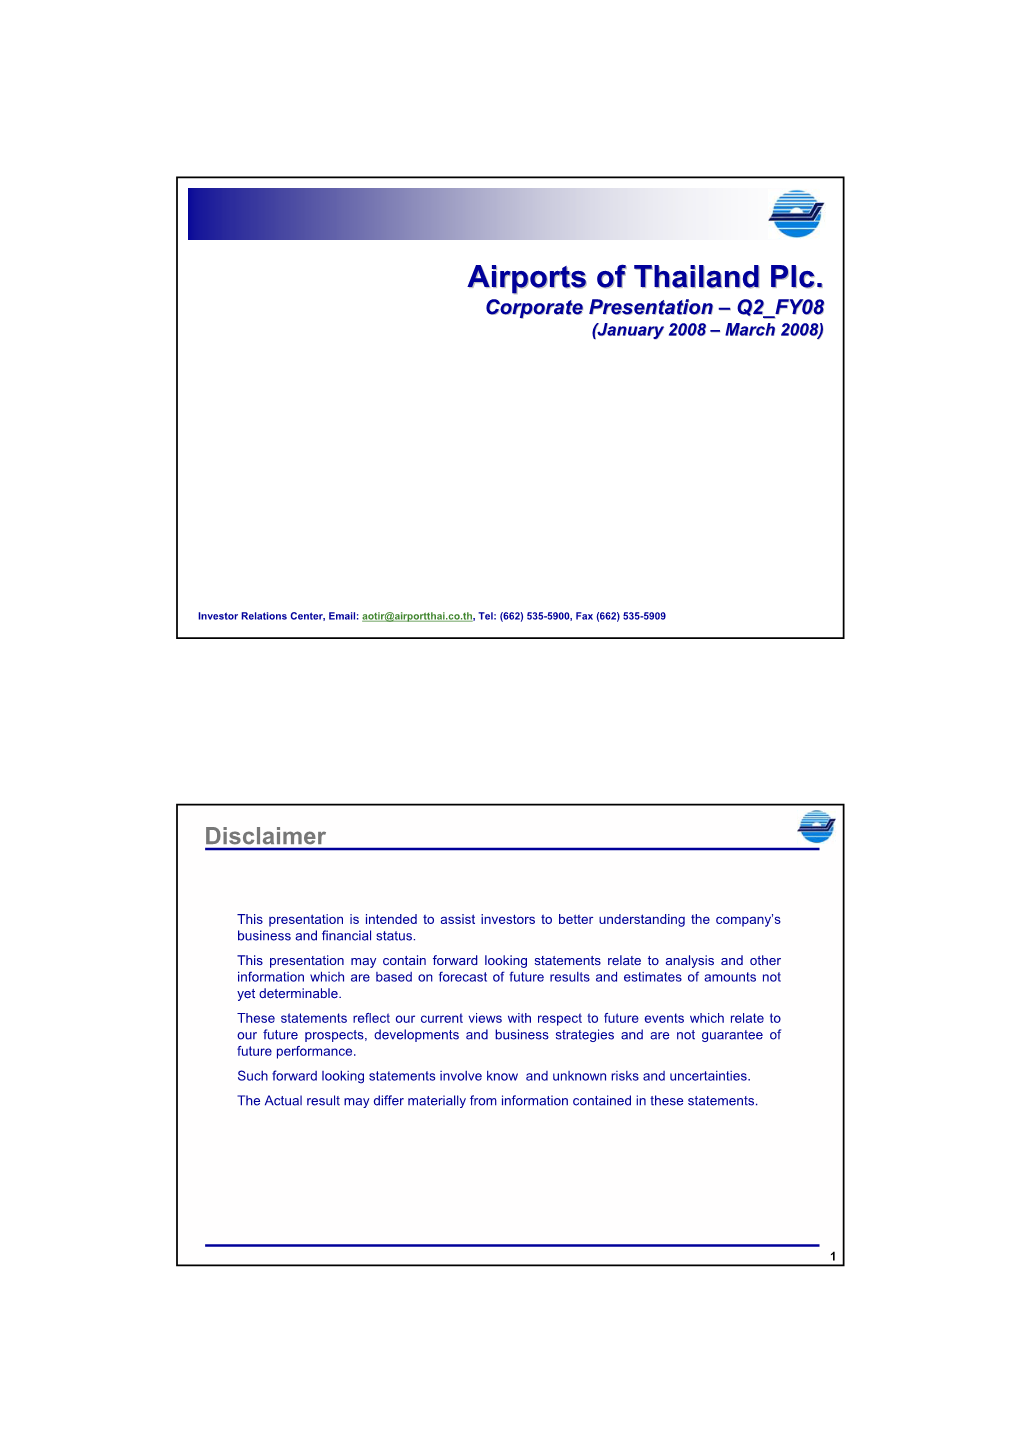 Airports of Thailand Plc. Corporate Presentation – Q2 FY08 (January 2008 – March 2008)